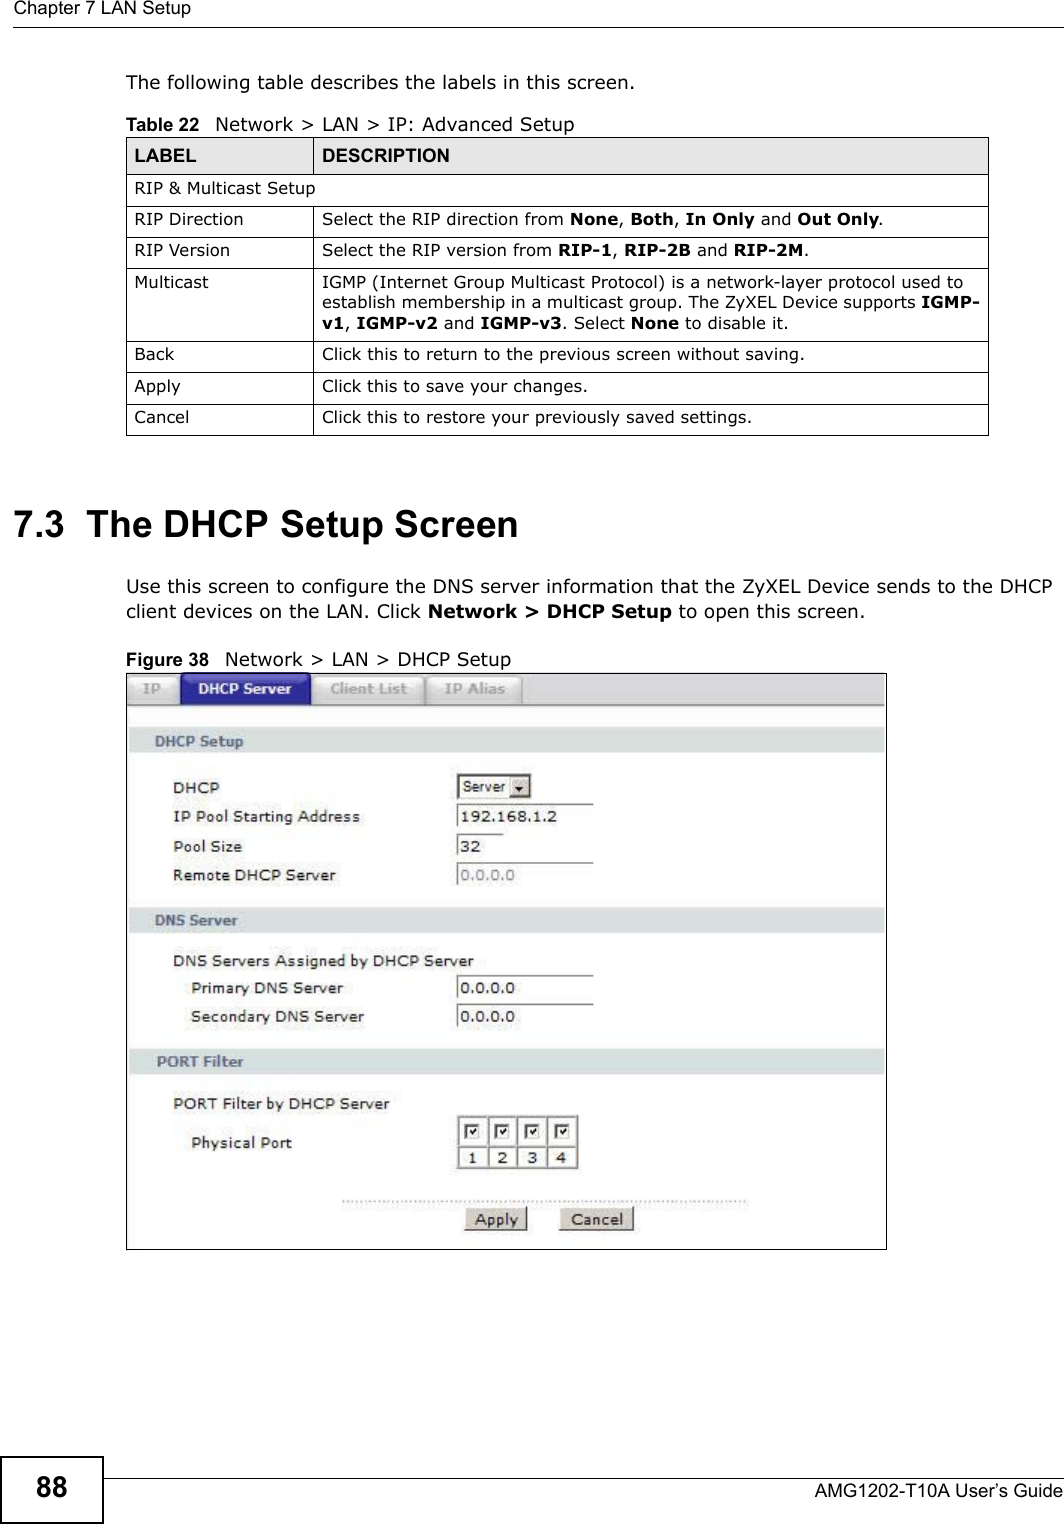 Chapter 7 LAN SetupAMG1202-T10A User’s Guide88The following table describes the labels in this screen.  7.3  The DHCP Setup ScreenUse this screen to configure the DNS server information that the ZyXEL Device sends to the DHCP client devices on the LAN. Click Network &gt; DHCP Setup to open this screen.Figure 38   Network &gt; LAN &gt; DHCP SetupTable 22   Network &gt; LAN &gt; IP: Advanced SetupLABEL DESCRIPTIONRIP &amp; Multicast SetupRIP Direction Select the RIP direction from None, Both, In Only and Out Only.RIP Version Select the RIP version from RIP-1, RIP-2B and RIP-2M.Multicast IGMP (Internet Group Multicast Protocol) is a network-layer protocol used to establish membership in a multicast group. The ZyXEL Device supports IGMP-v1, IGMP-v2 and IGMP-v3. Select None to disable it.Back Click this to return to the previous screen without saving.Apply Click this to save your changes.Cancel Click this to restore your previously saved settings.